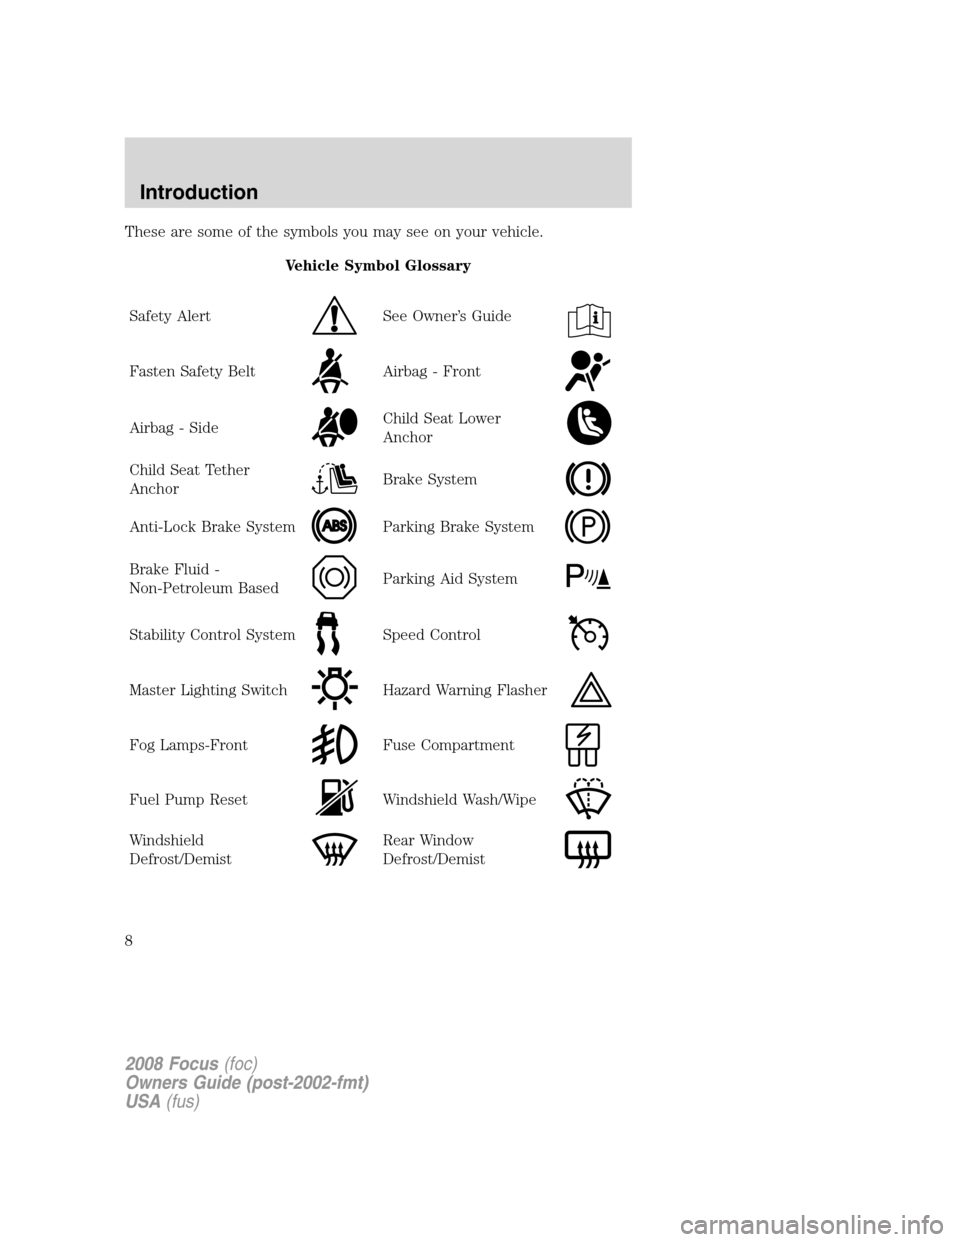 FORD FOCUS 2008 2.G Owners Manual These are some of the symbols you may see on your vehicle.
Vehicle Symbol Glossary
Safety Alert
See Owner’s Guide
Fasten Safety BeltAirbag - Front
Airbag - SideChild Seat Lower
Anchor
Child Seat Tet